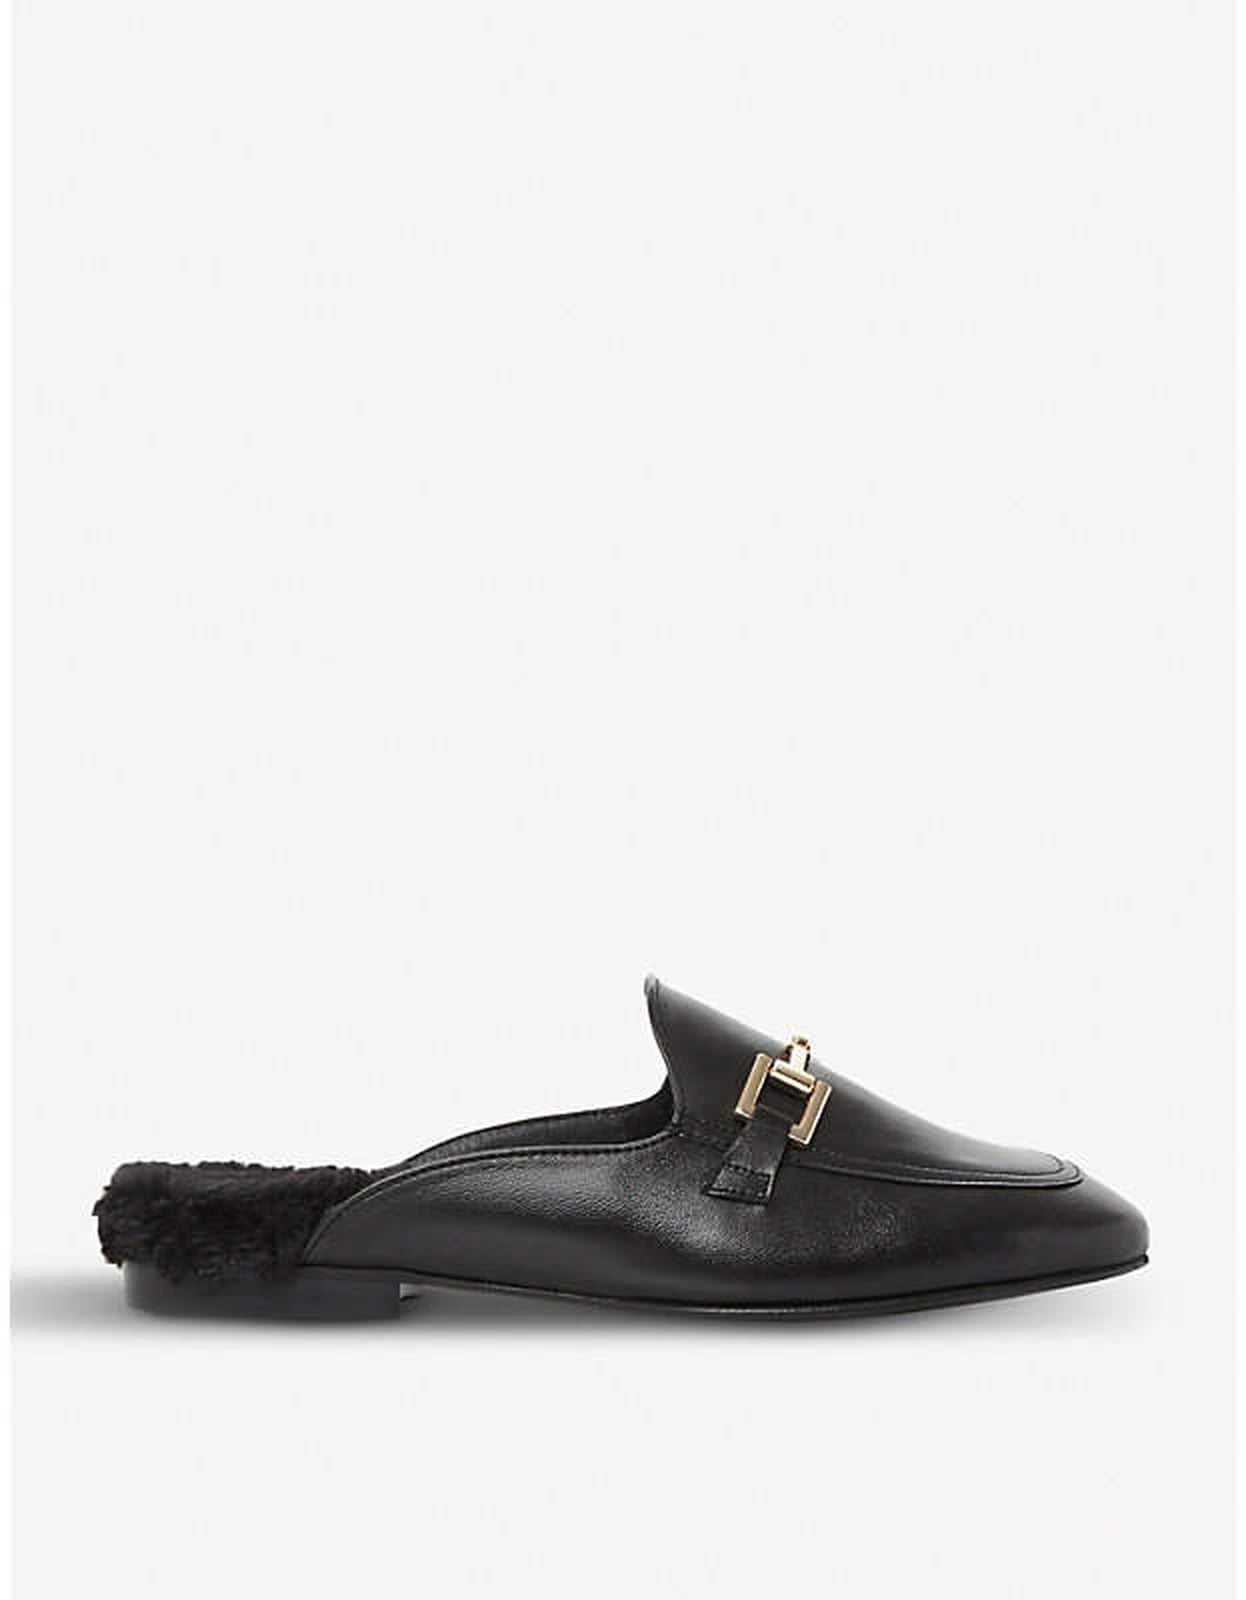 Shoes That Look Like Gucci Loafers | POPSUGAR Fashion